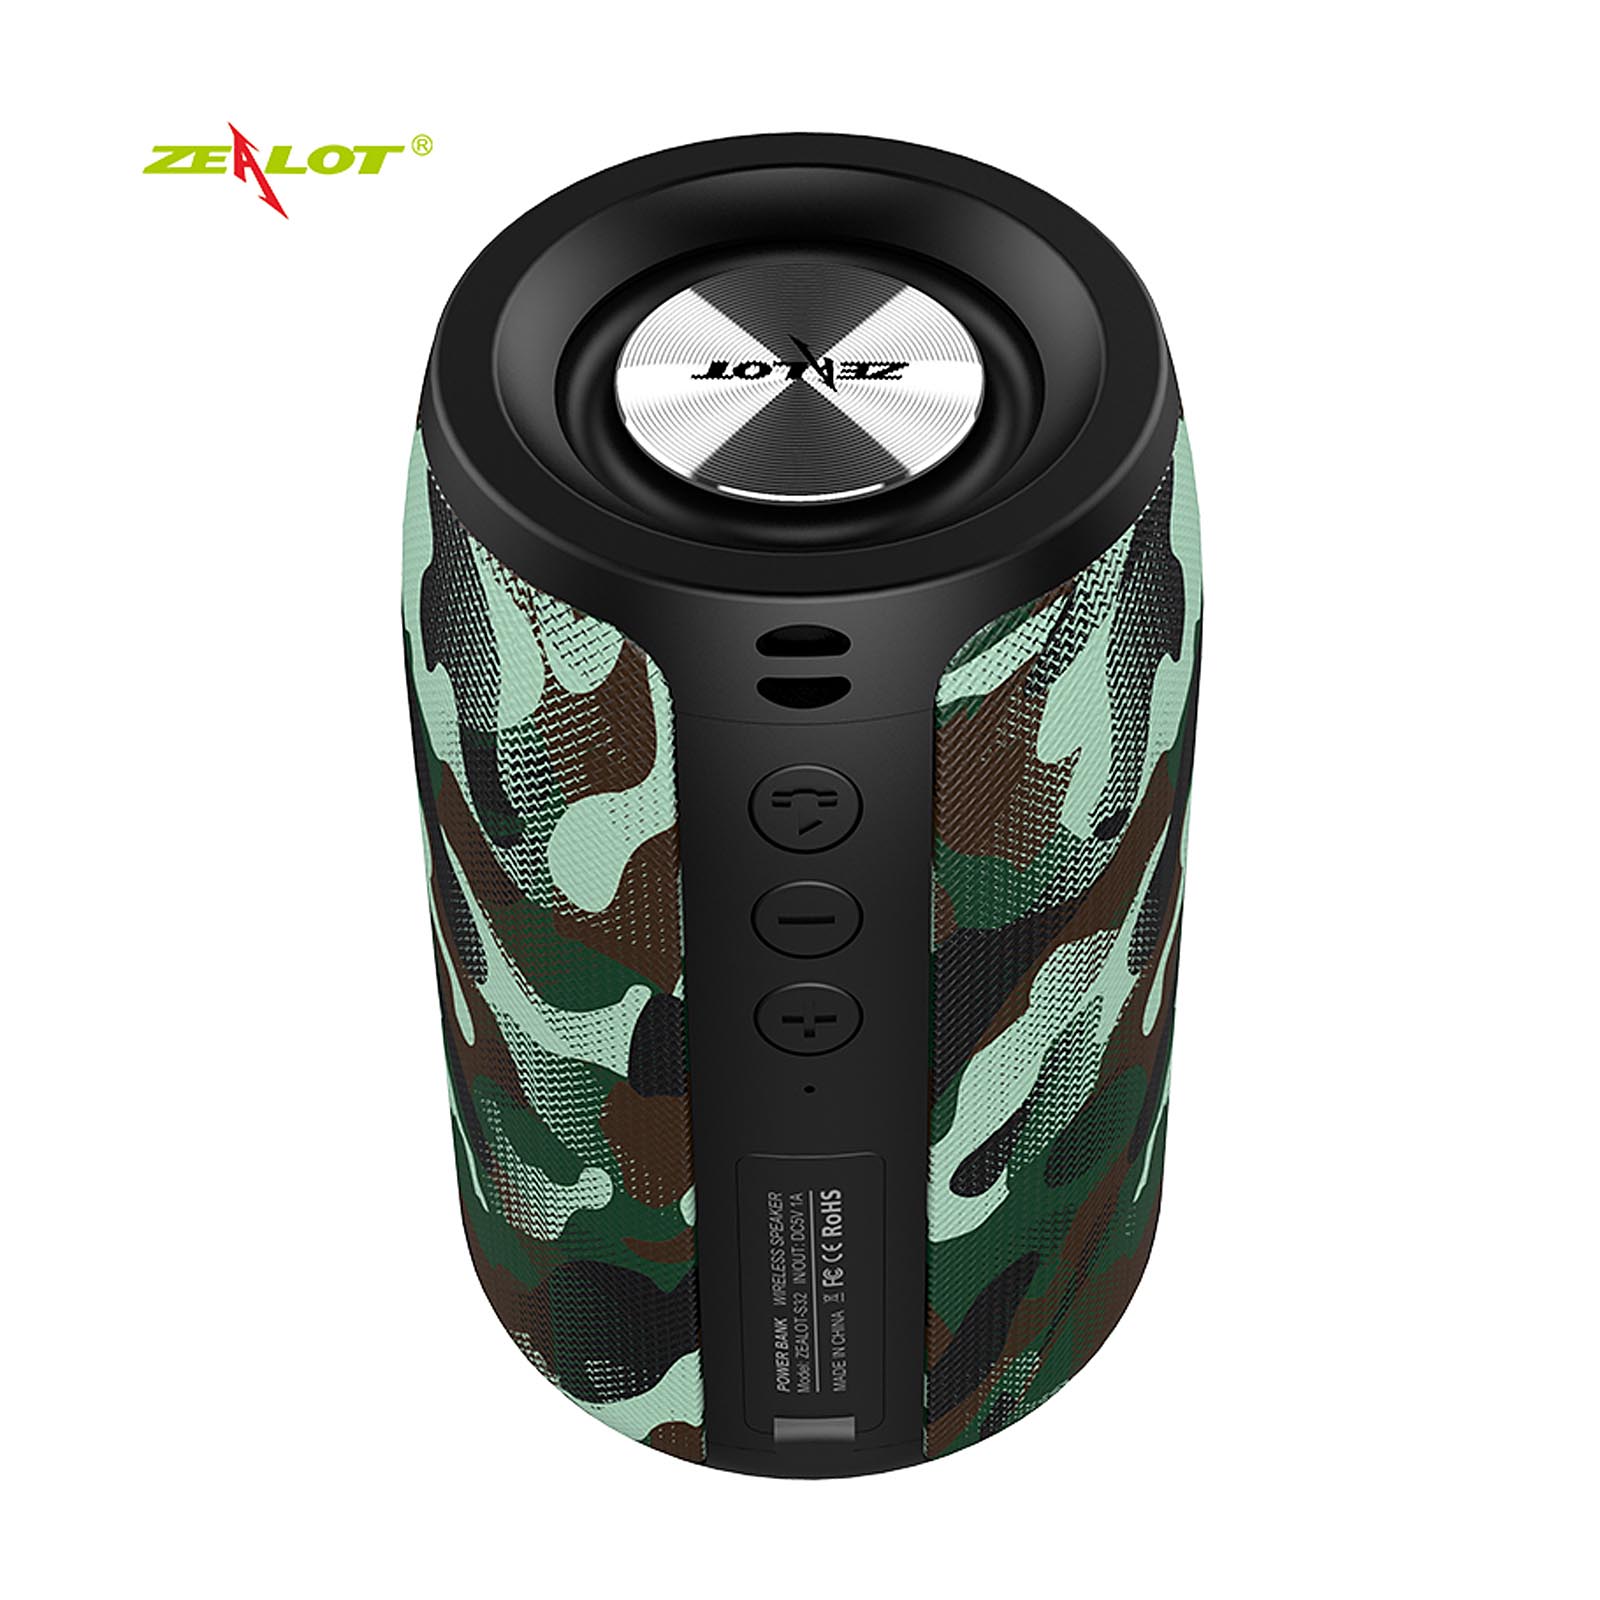 Tomshoo ZEALOT S32 Portable Wireless Speaker 5W Subwoofer Outdoor Sound Box Music Player U Disk TF Card Reader AUX-IN 2000mAh Battery - image 1 of 7